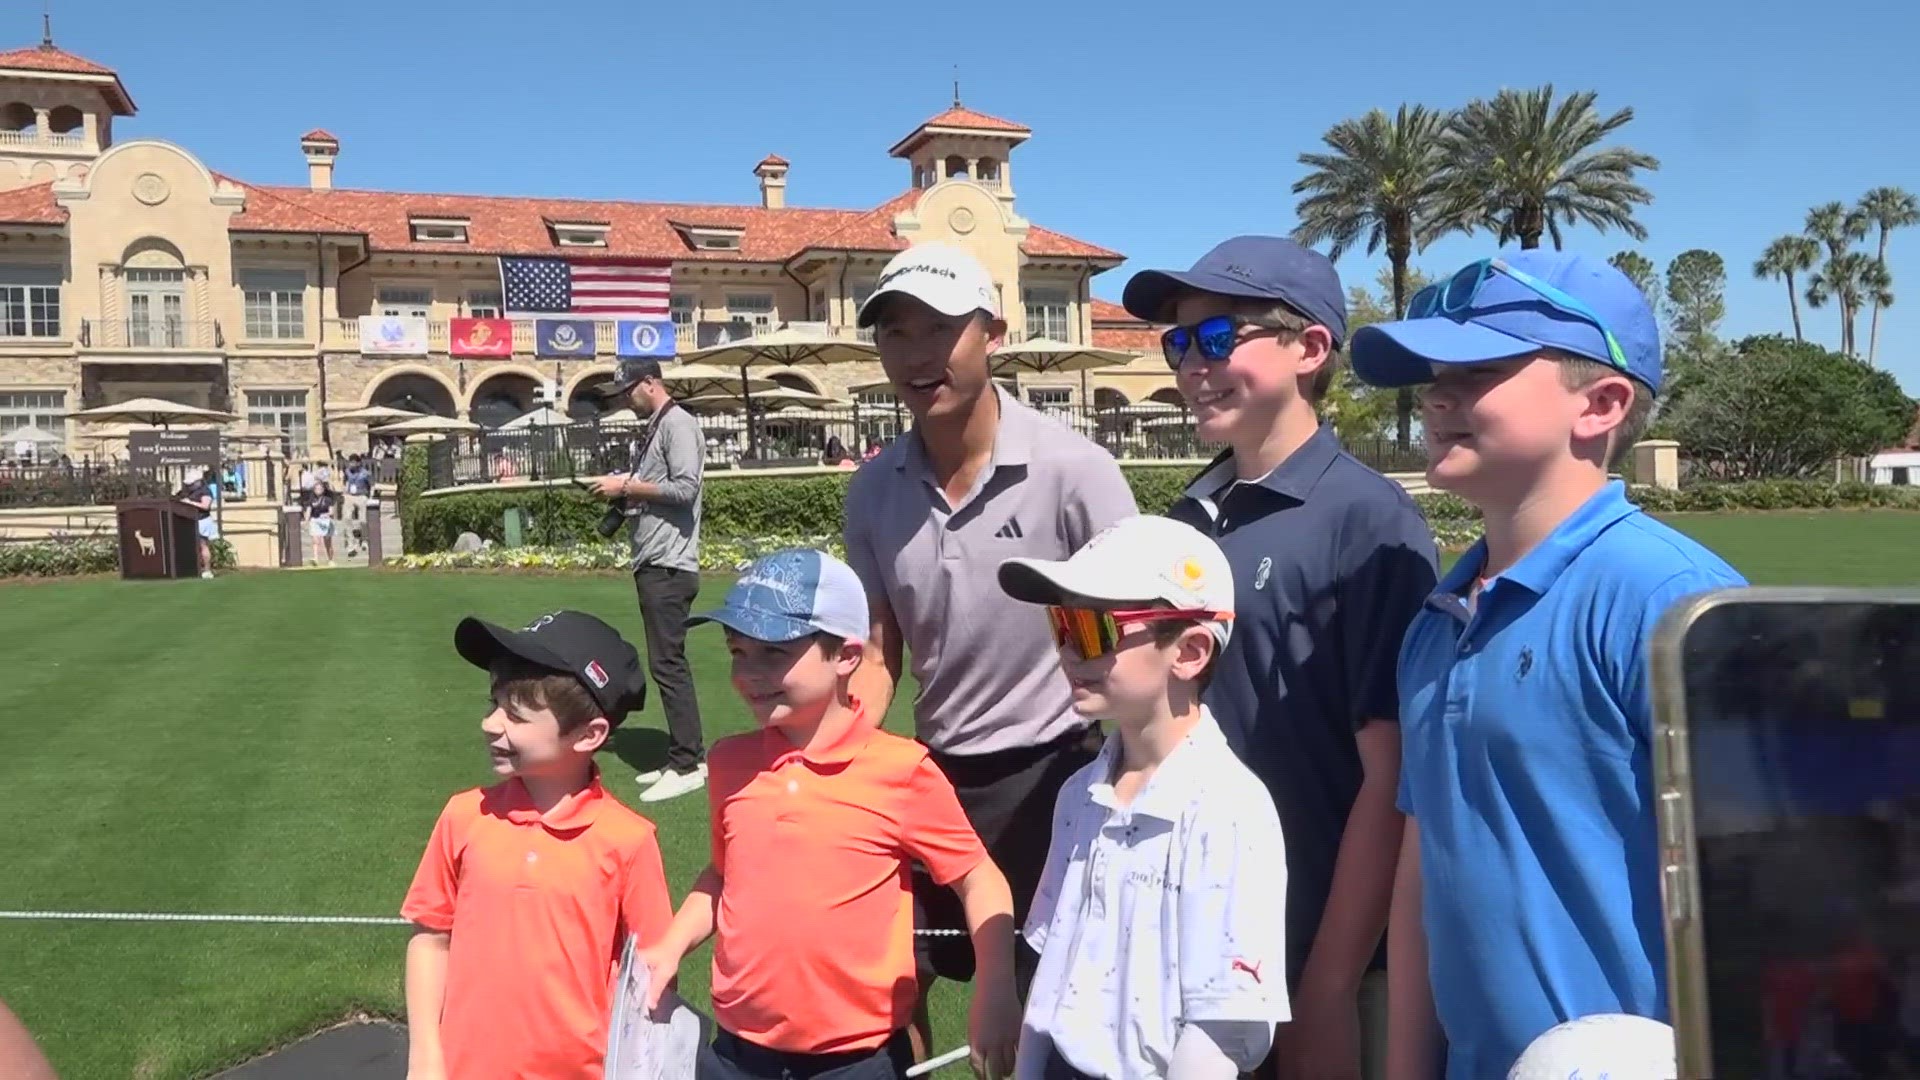 Tuesdays and Wednesdays are when young players can get autographs/photos from the golfers.